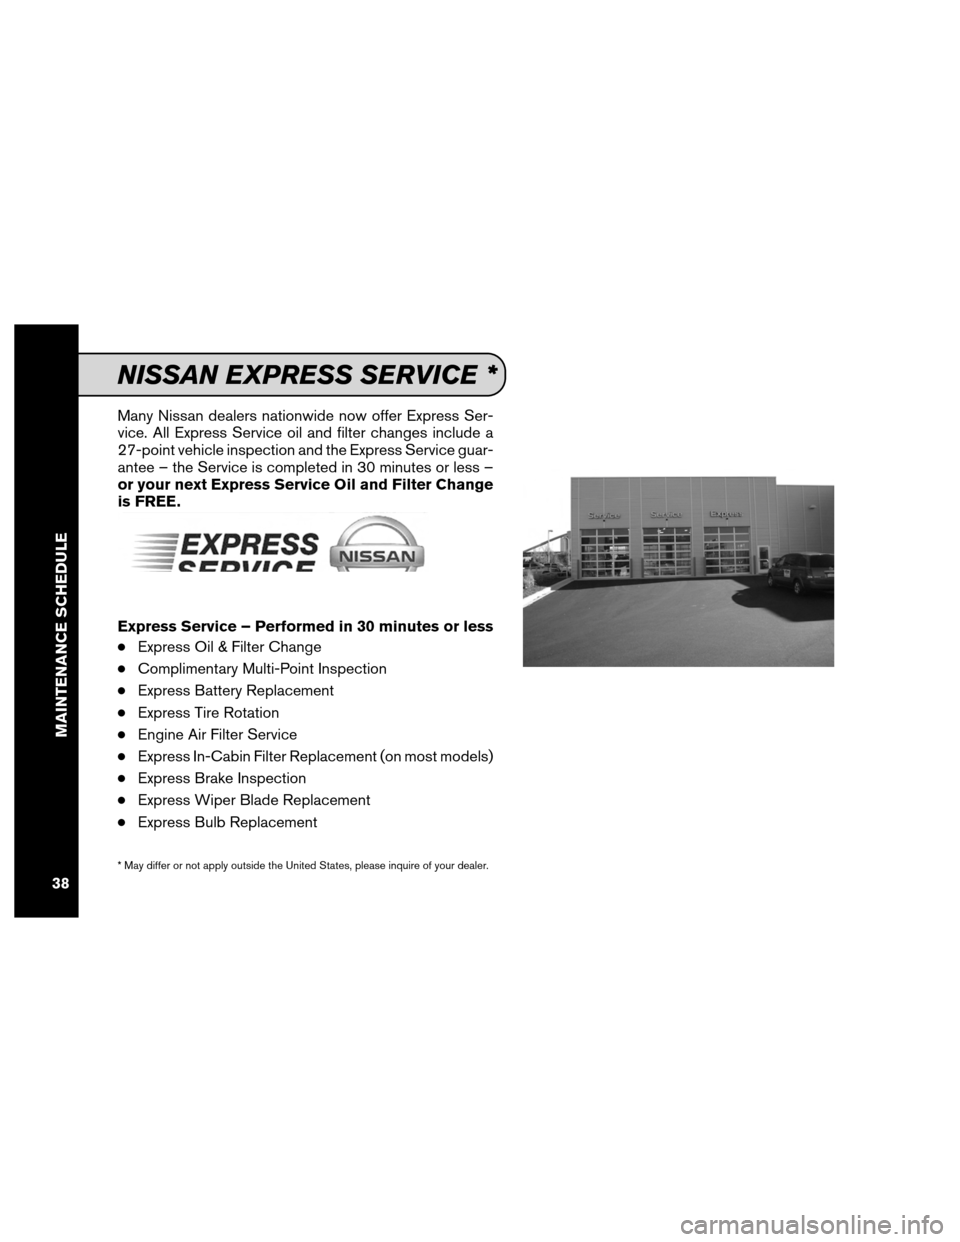 NISSAN XTERRA 2012 N50 / 2.G Service And Maintenance Guide Many Nissan dealers nationwide now offer Express Ser-
vice. All Express Service oil and filter changes include a
27-point vehicle inspection and the Express Service guar-
antee – the Service is comp